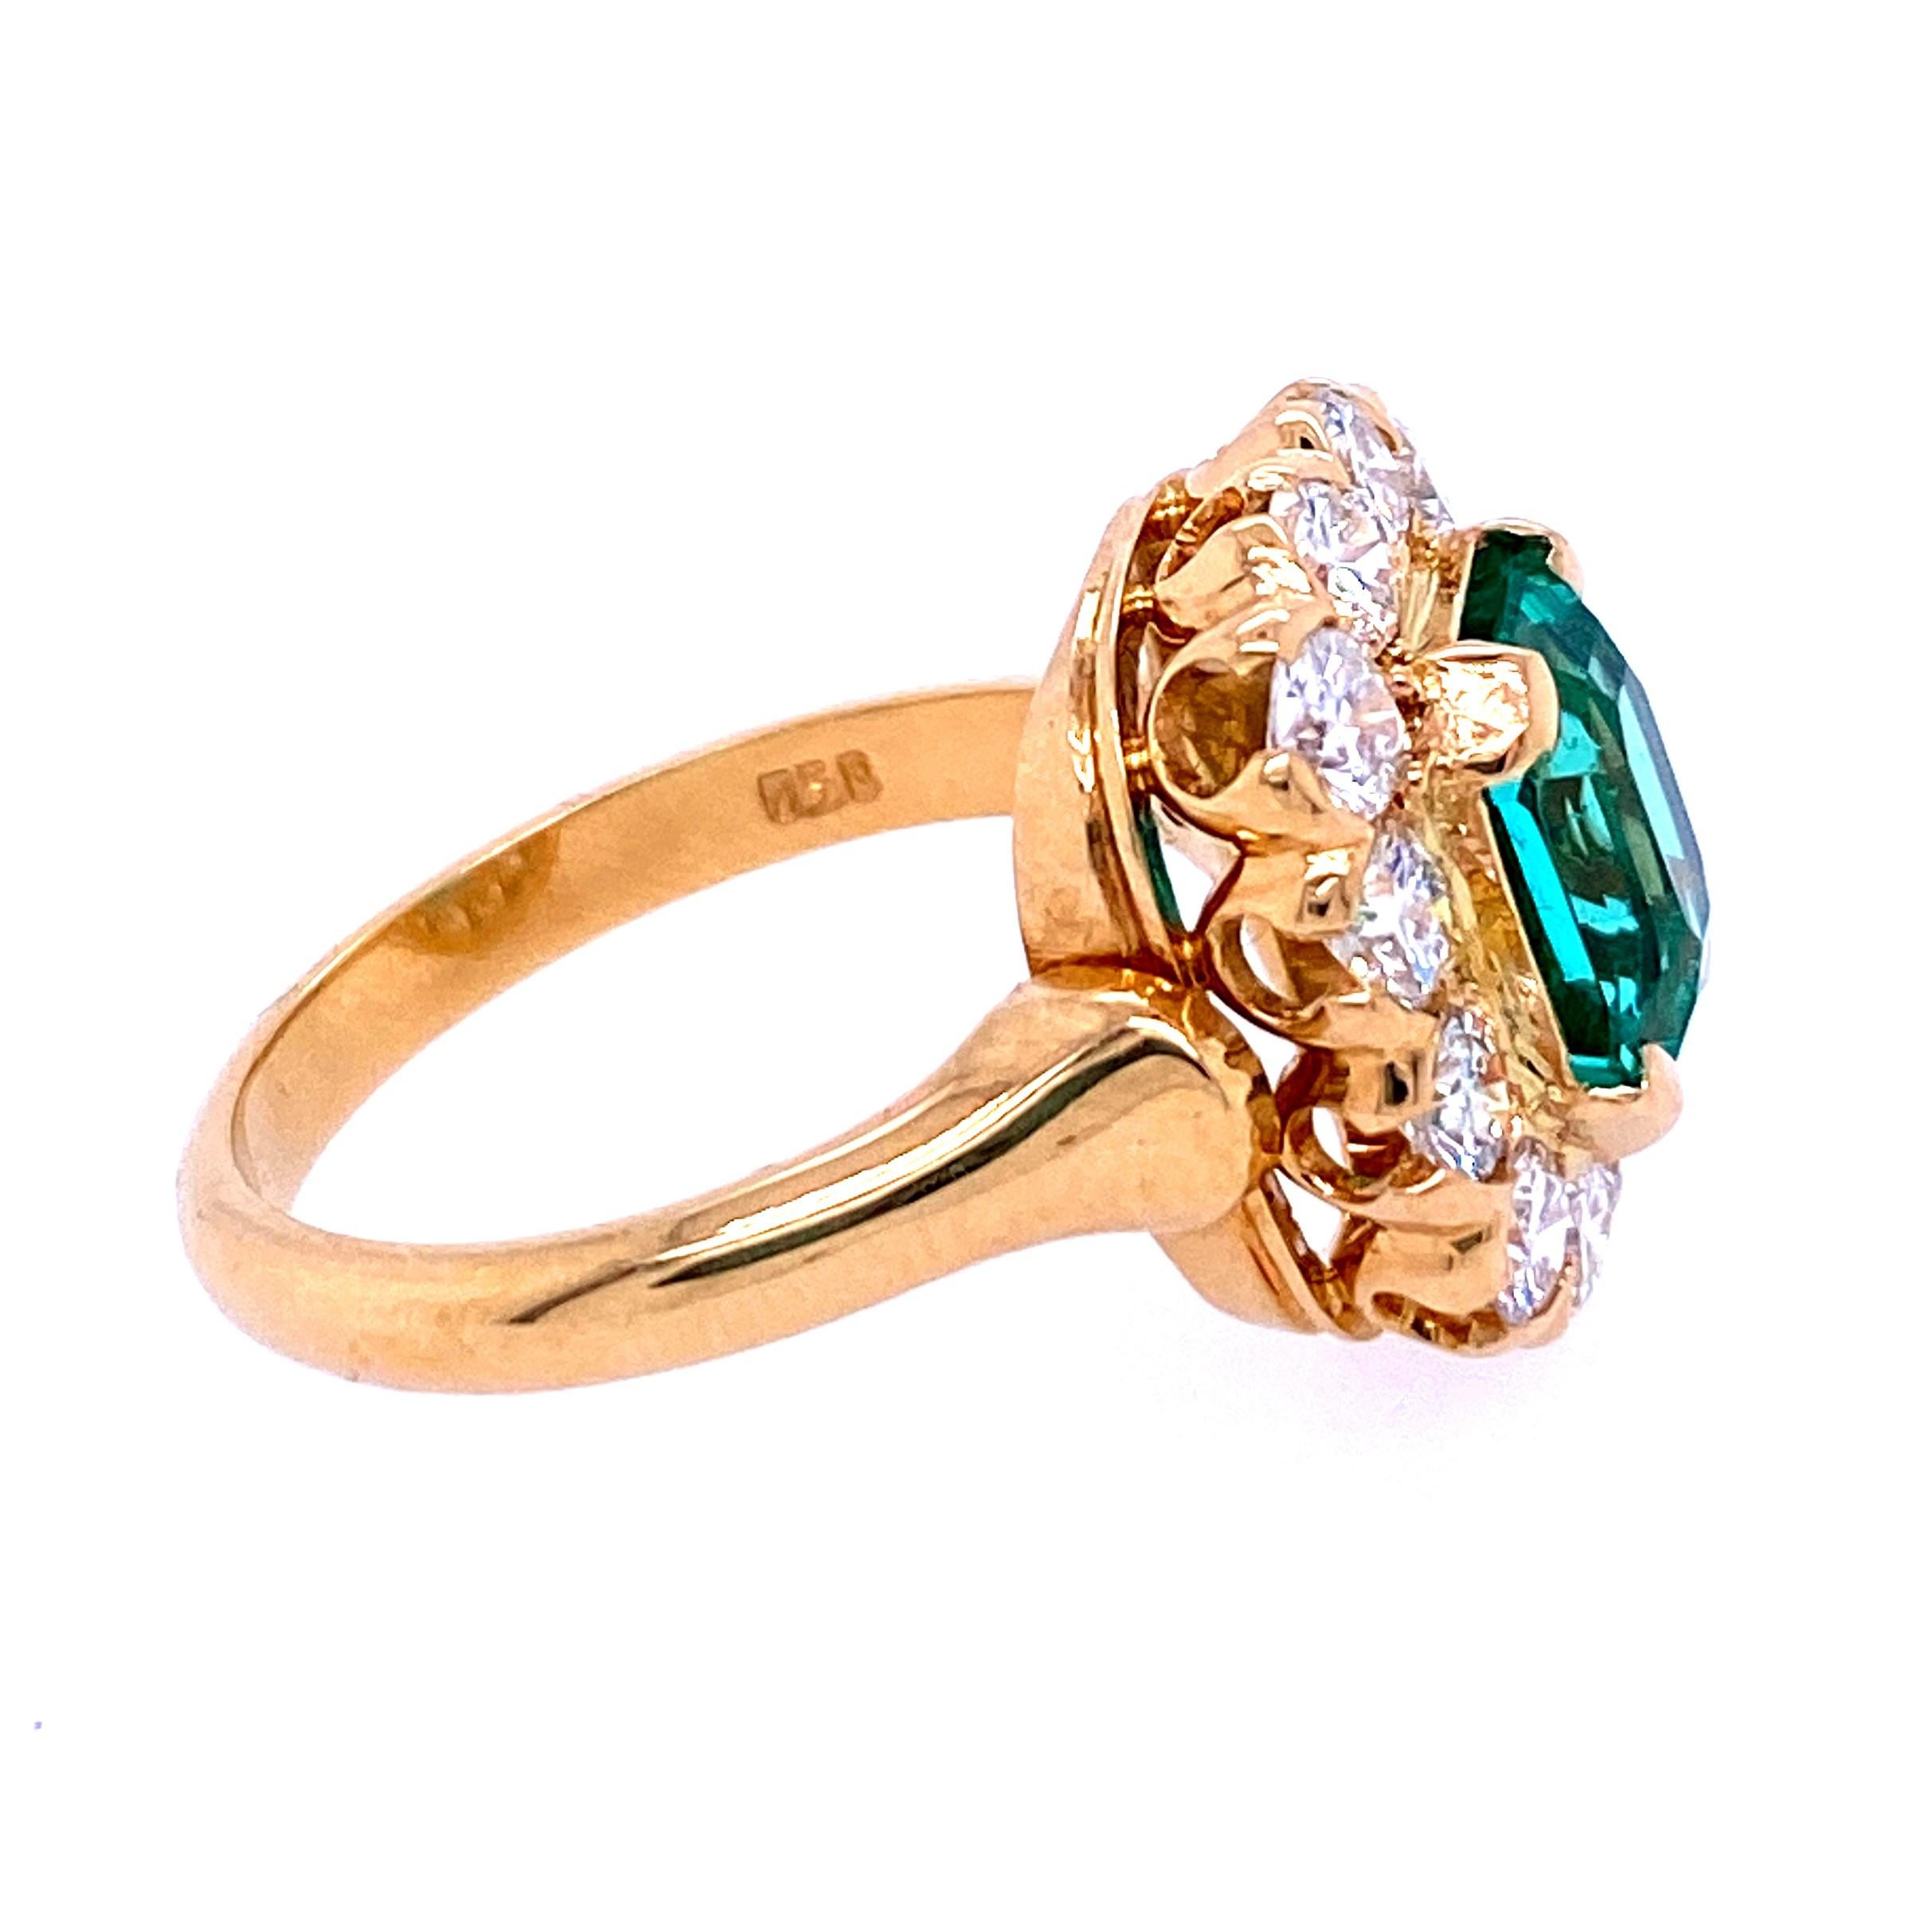 18kyg ring with one 2.17 carat rectangular step cut Colombian emerald accompanied by AGL report # 1105944 surrounded by twelve round brilliant diamonds, 1.20 carats total weight with matching E/F color and VS1-SI1 clarity. 